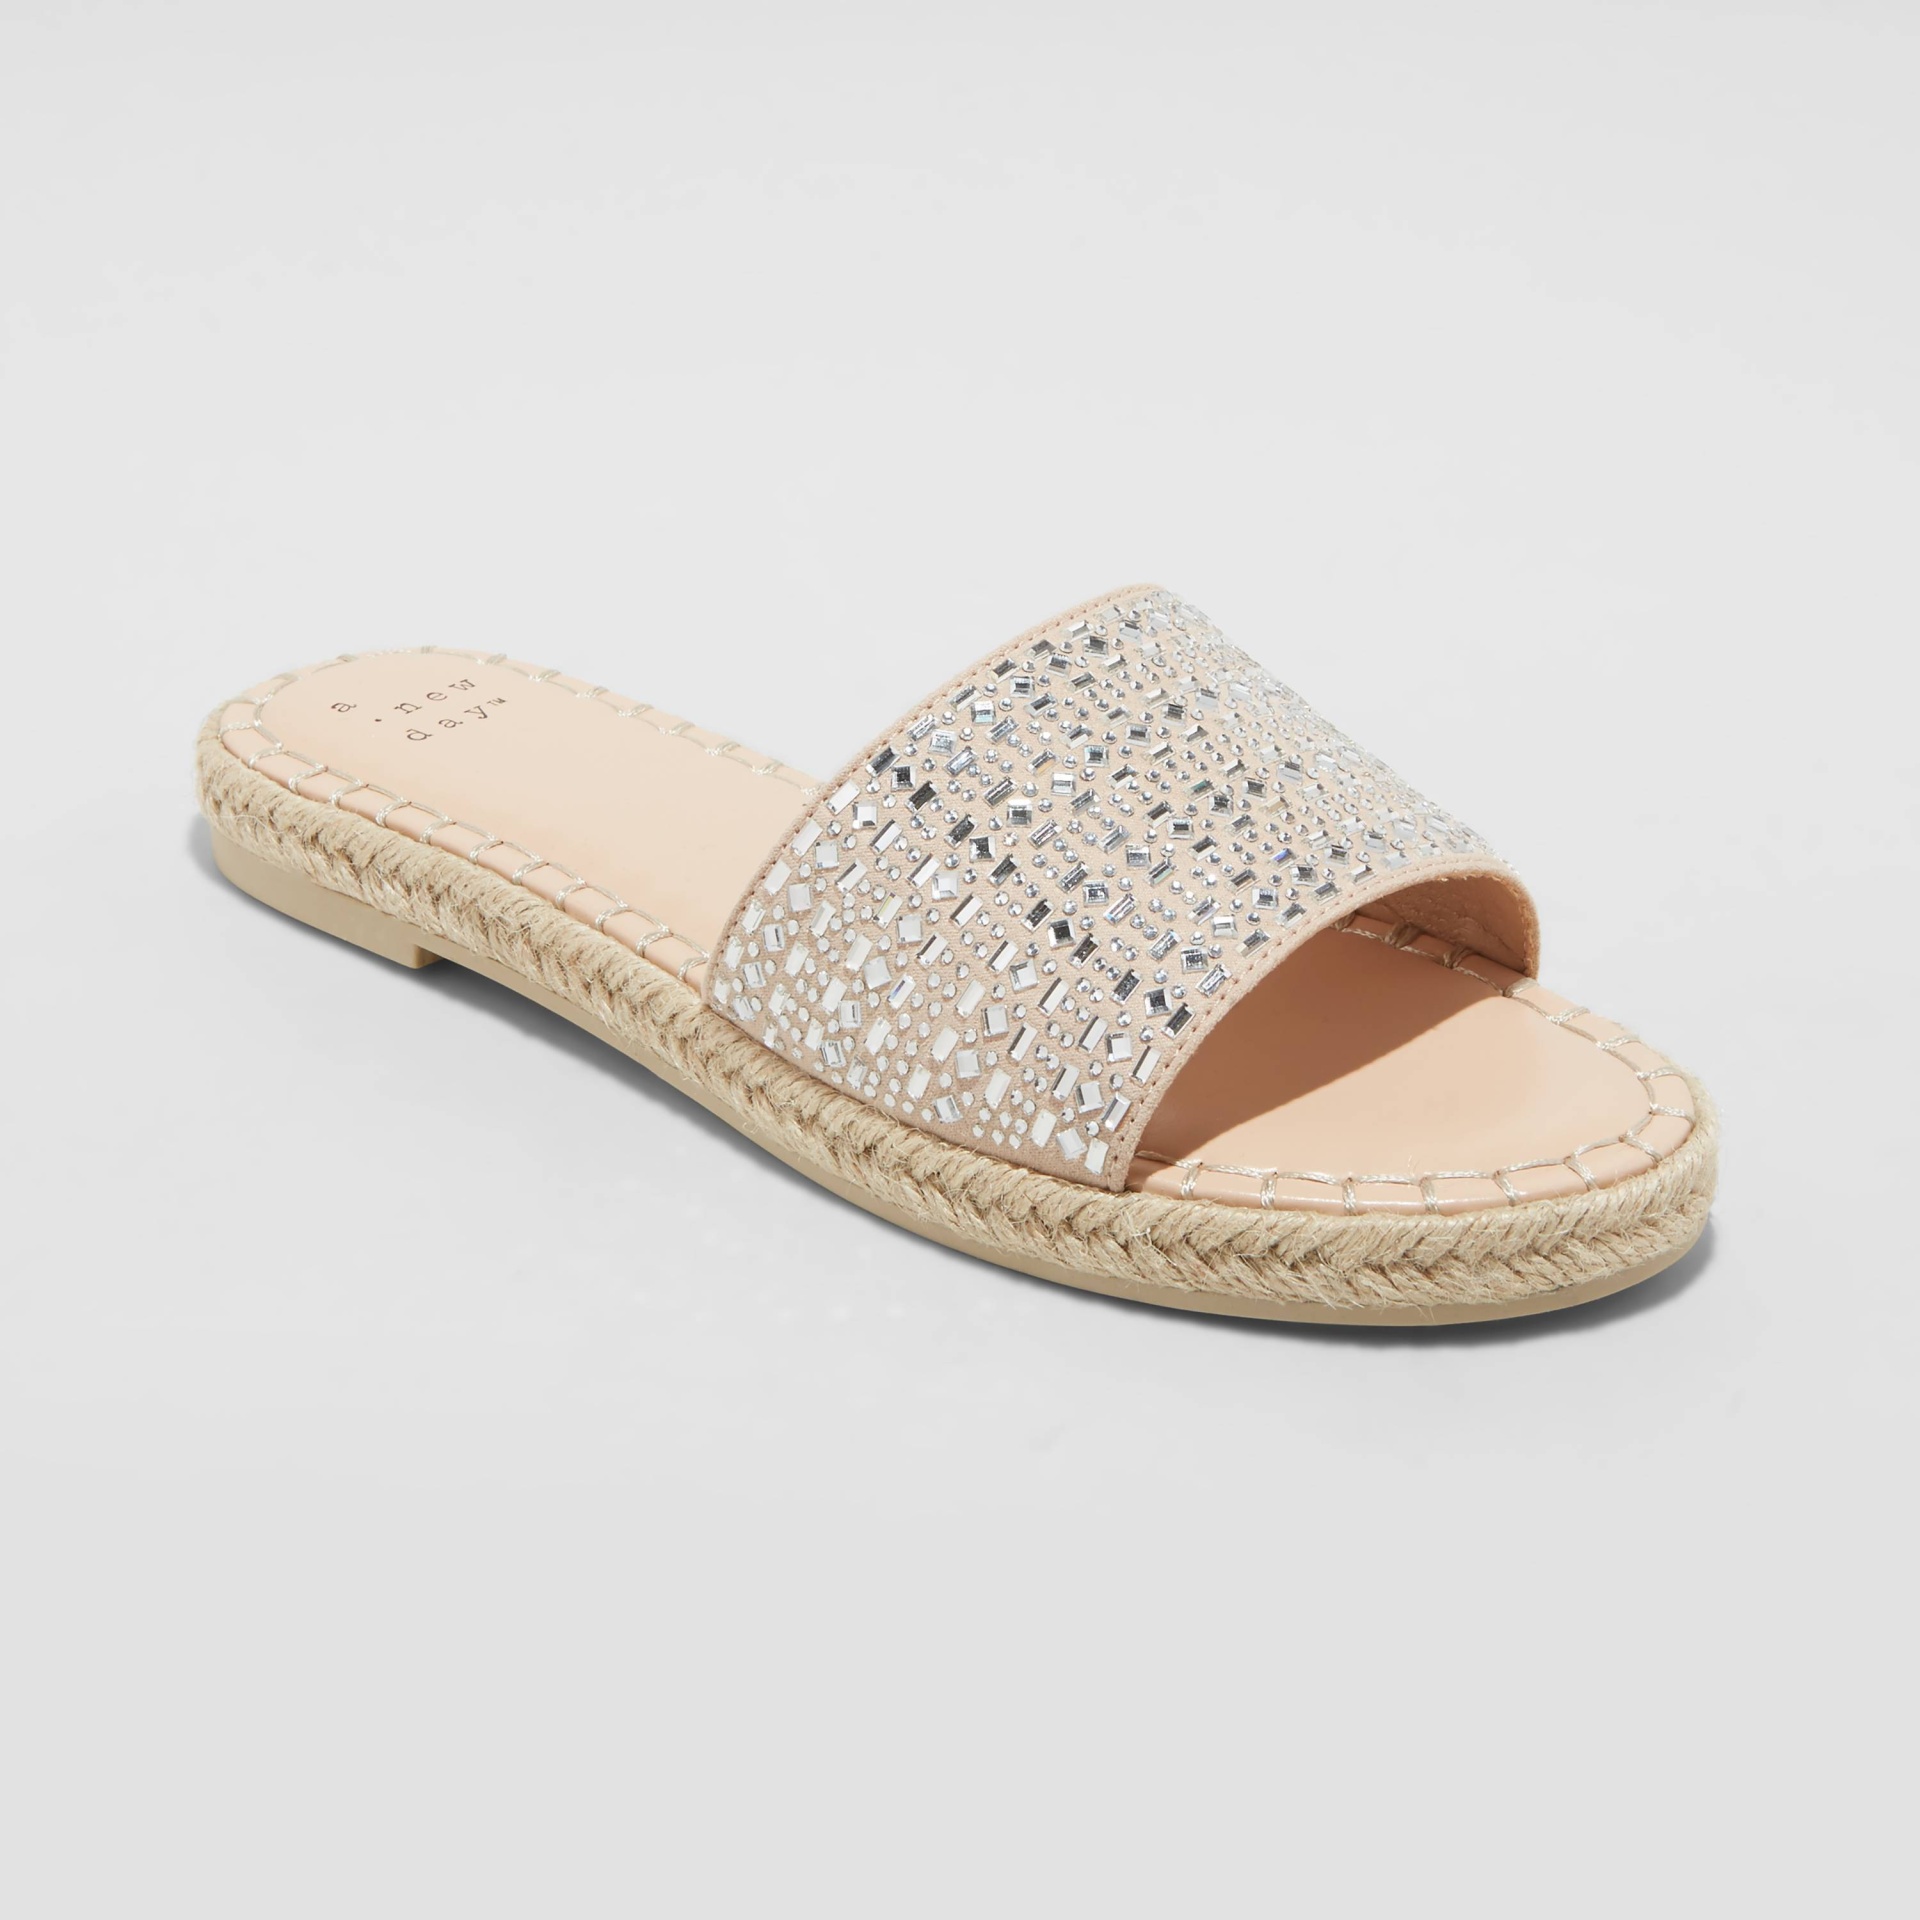 slide 1 of 4, Women's Kenna Embellished Espadrille Sandals - A New Day Tan 6.5, 1 ct